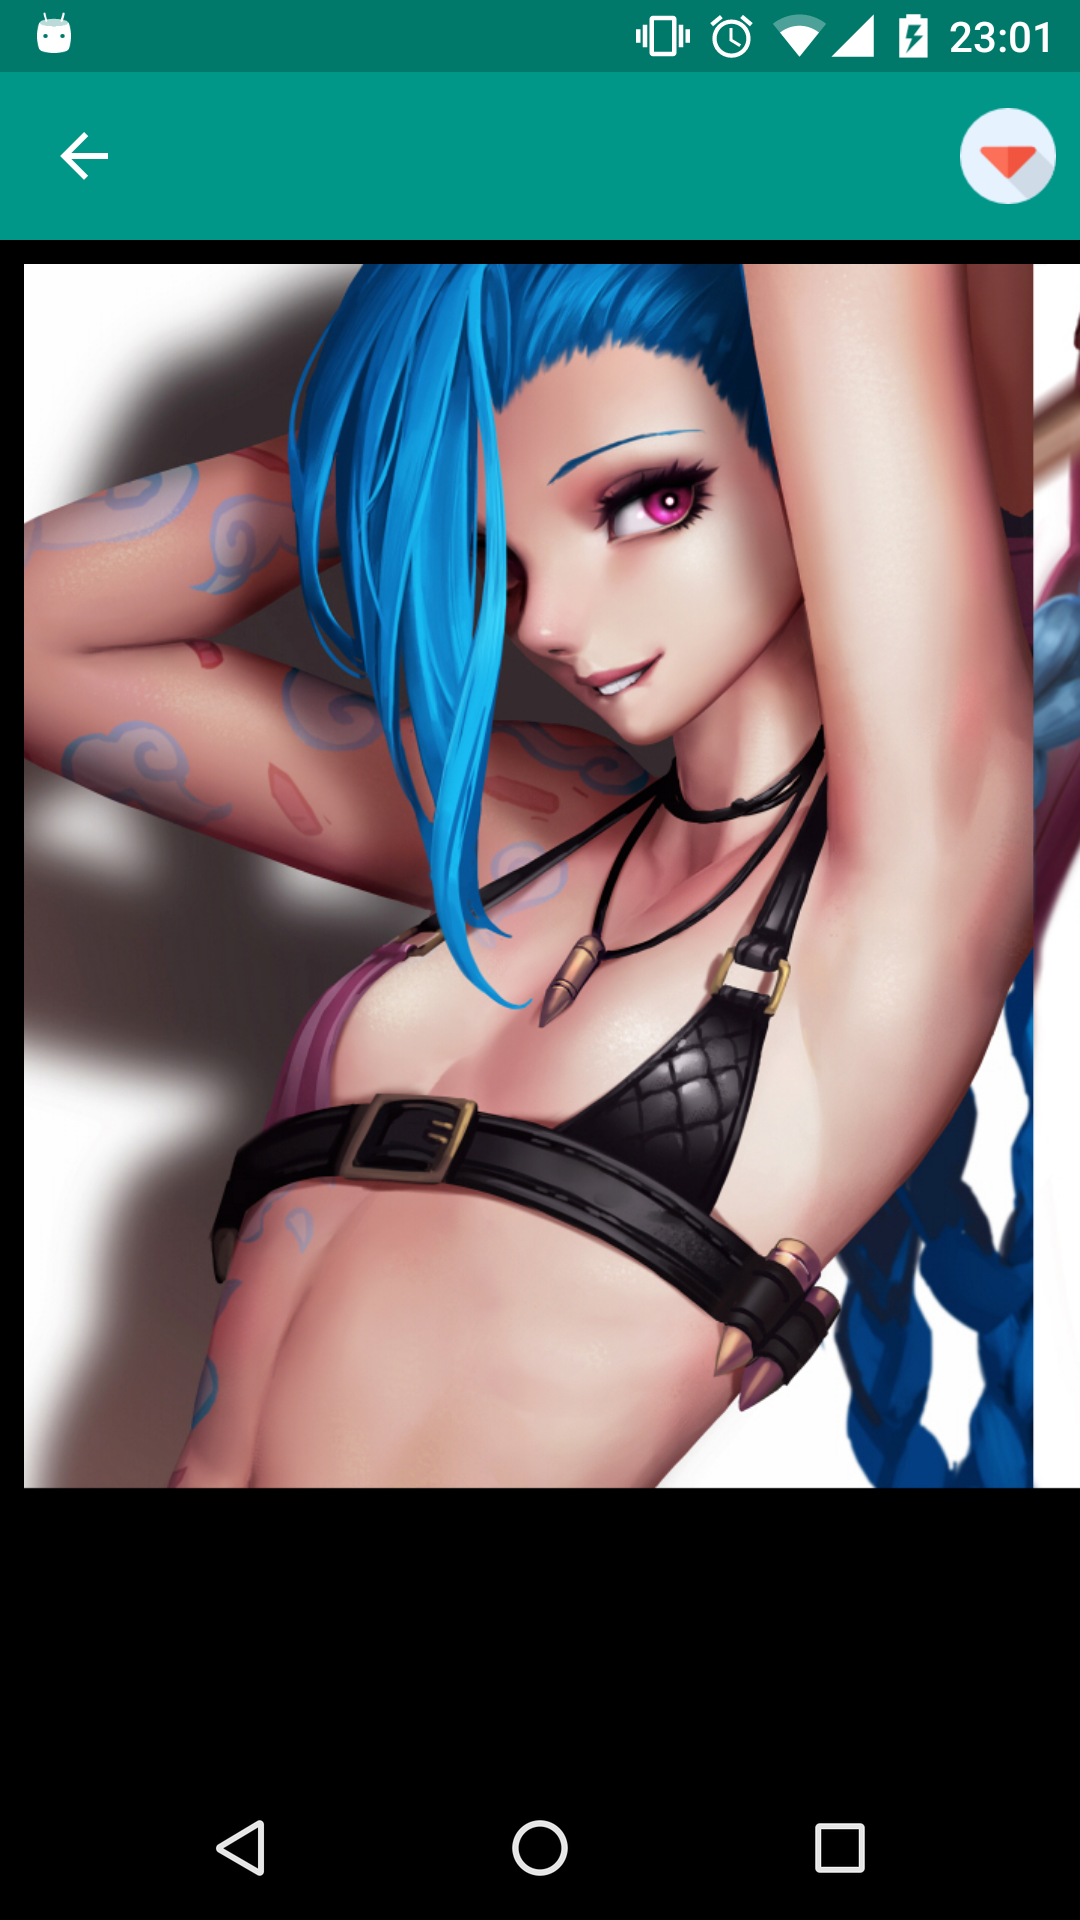 League of Legends wallpapers pictures,sexy,backgrounds,search,app,manga,mature,wallpapers,femboy,porn,galleries,android,image,futanari,league,pics,erotica,henati,download,apk,legends,hentia,for,hentai